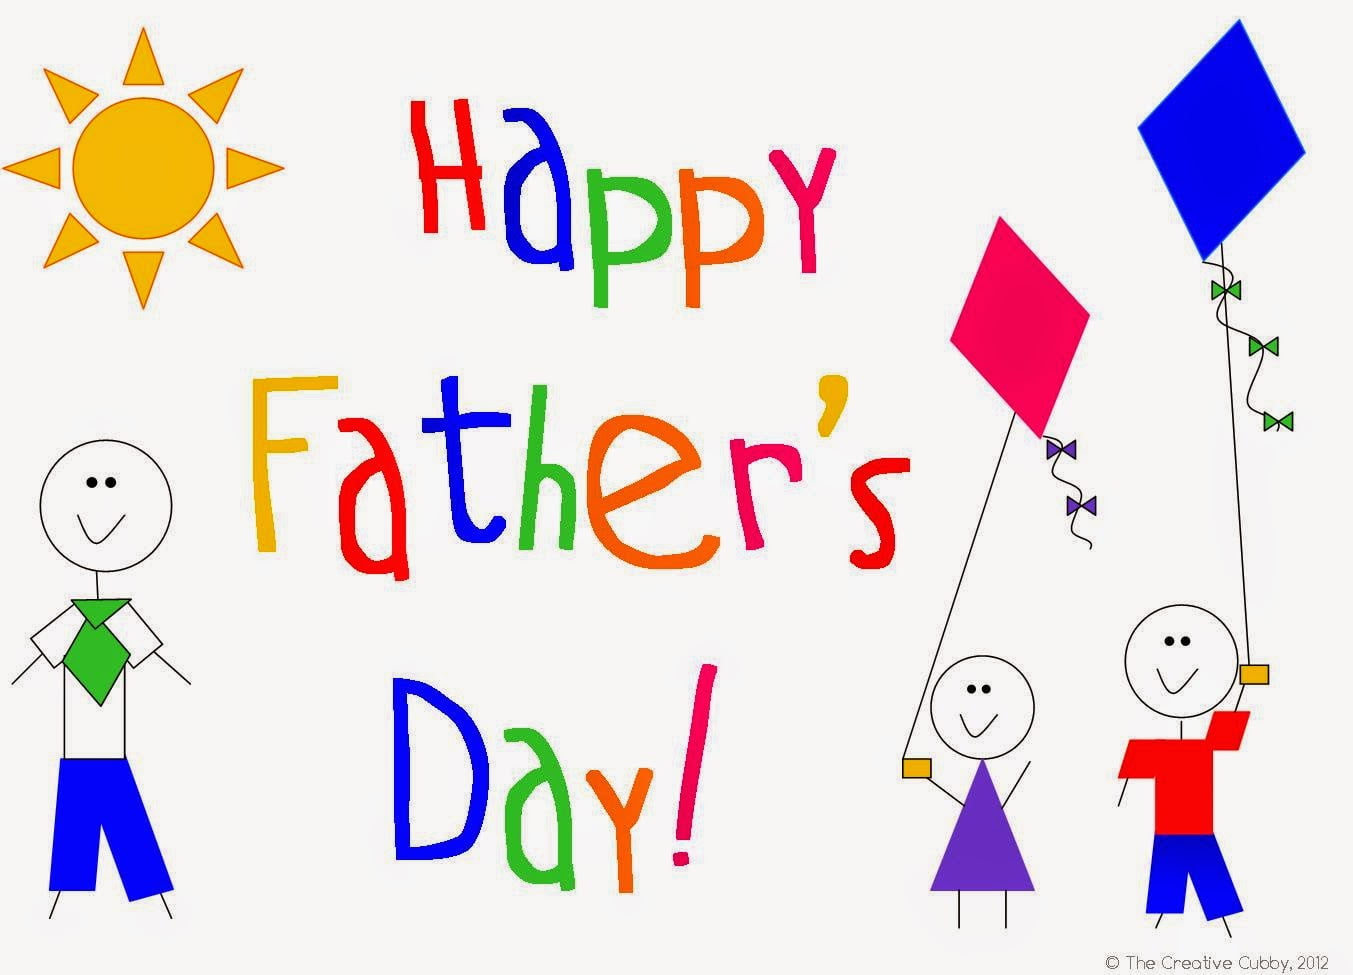 2018 Happy Fathers Day Wishes Quotes SMS Whatsapp Status DP Images 